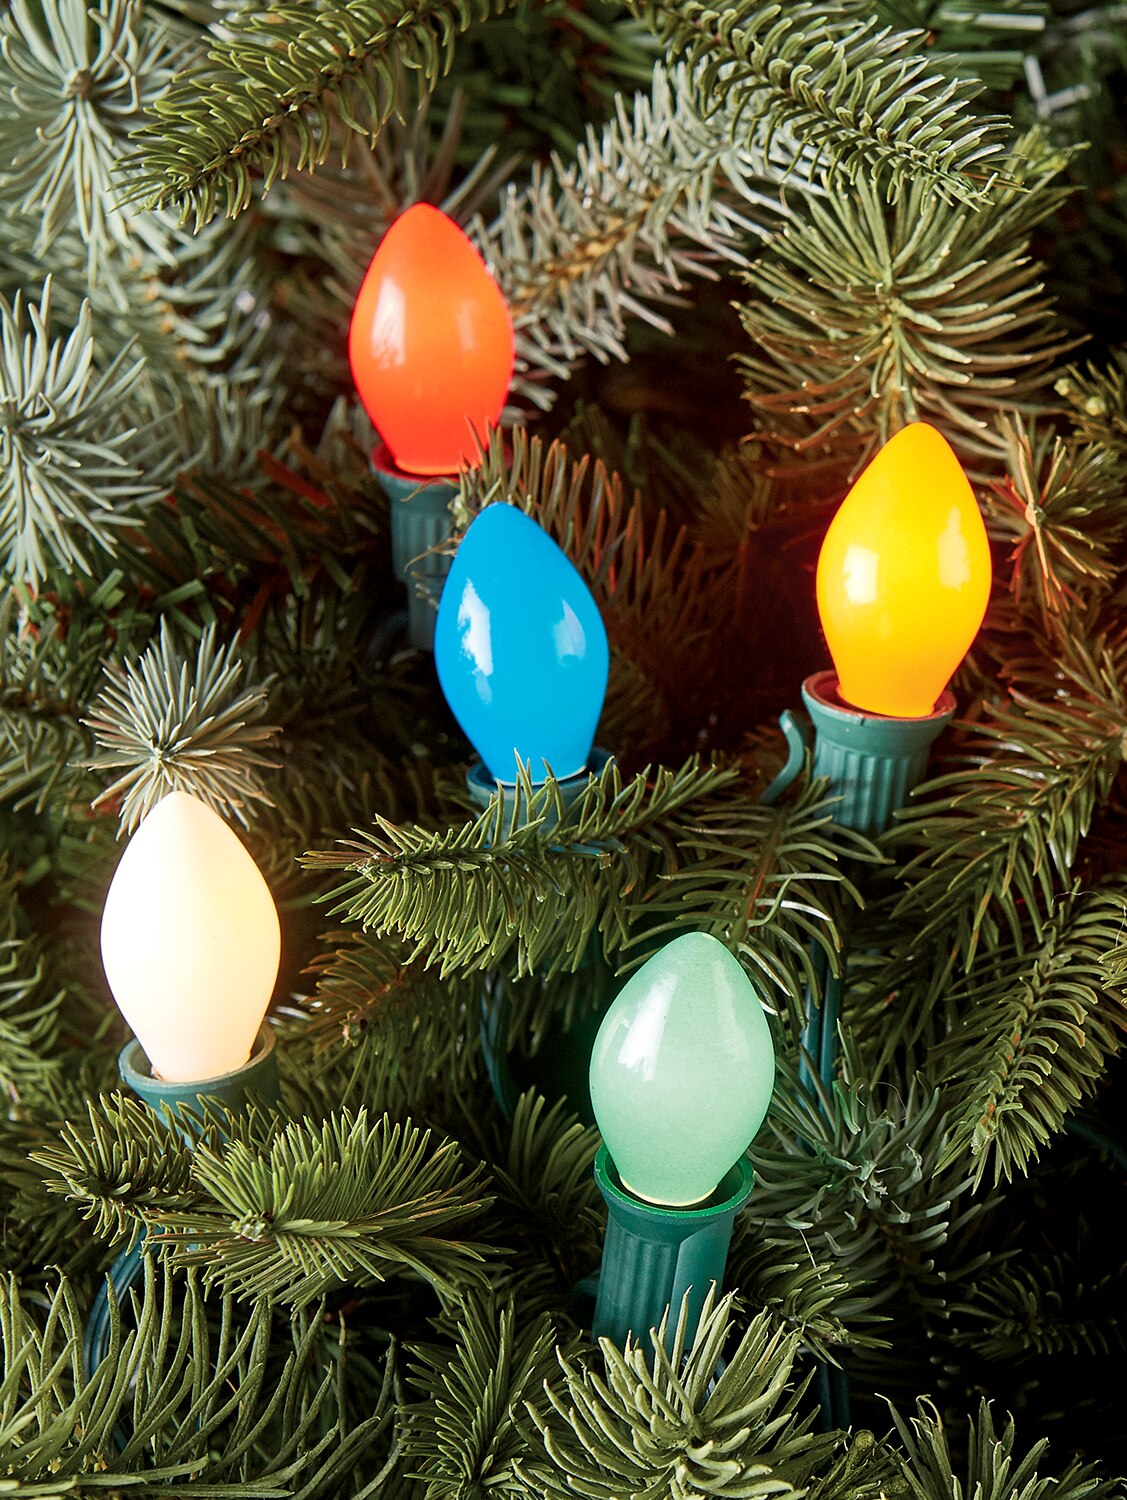 Details about   Joy Ornament C7 Outdoor and Indoor Christmas Replacements Bulbs Set of 20 